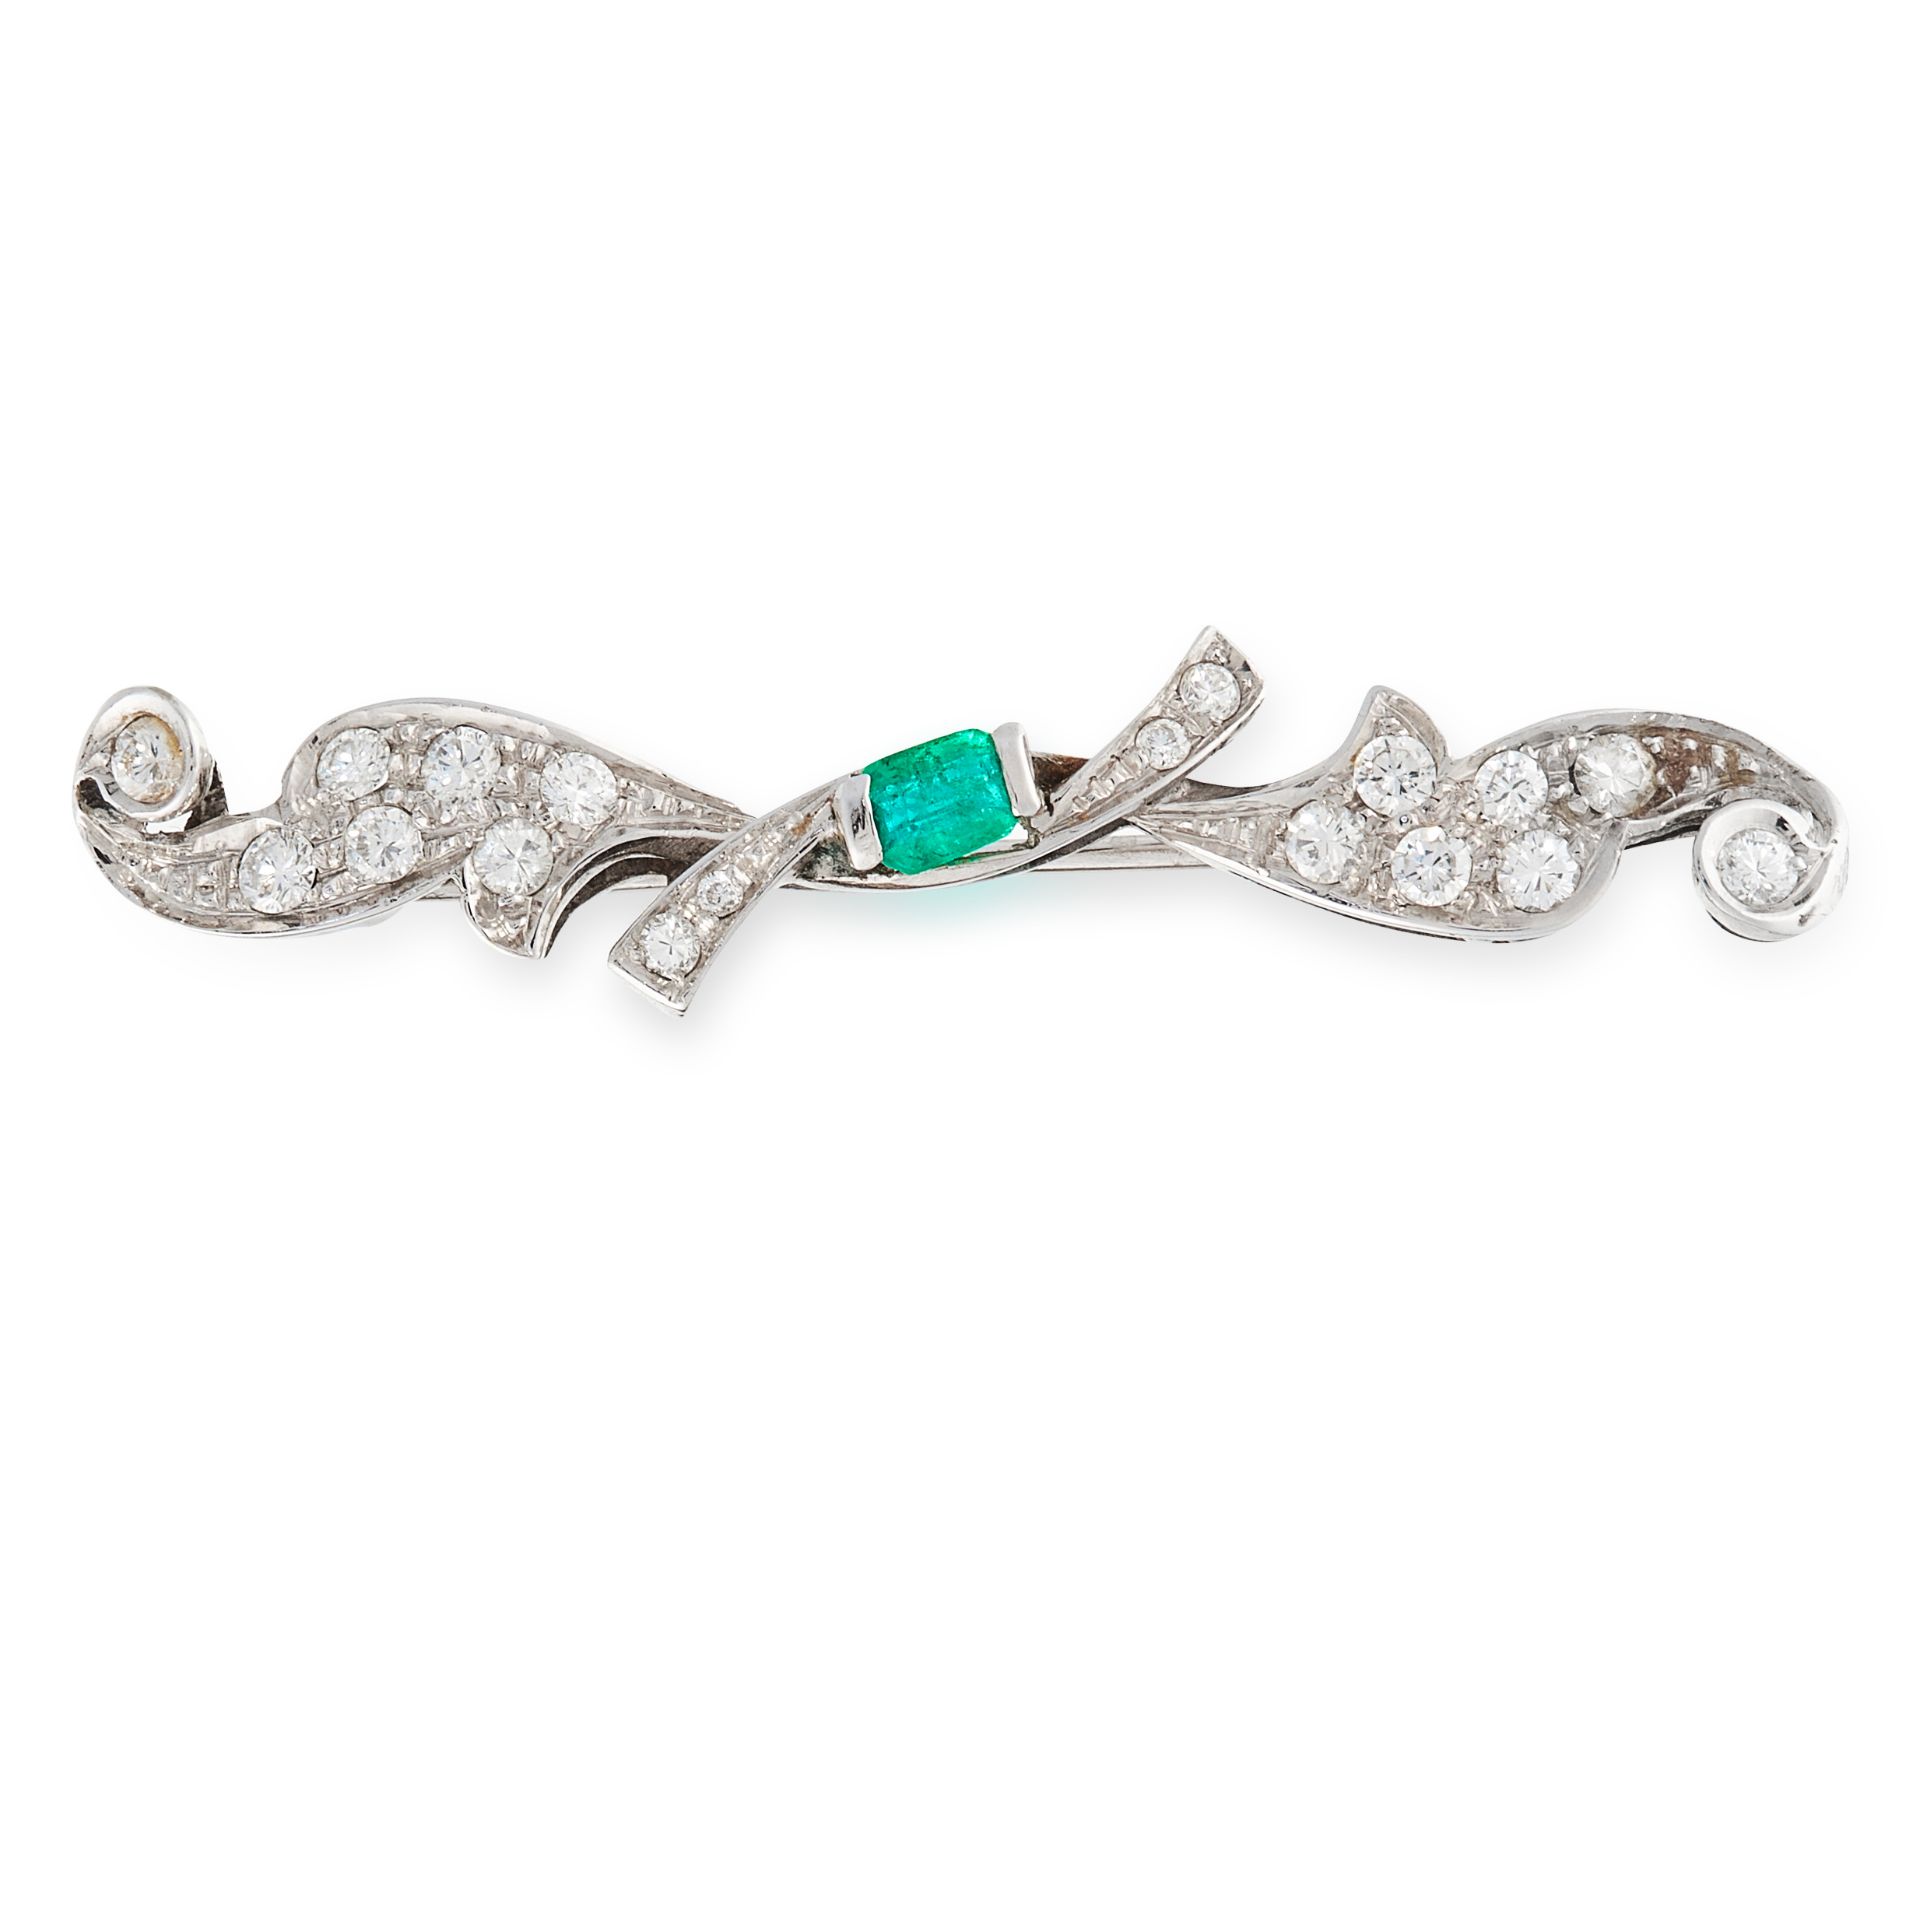 AN EMERALD AND DIAMOND BROOCH in bow design, set with a central emerald cut emerald and round cut